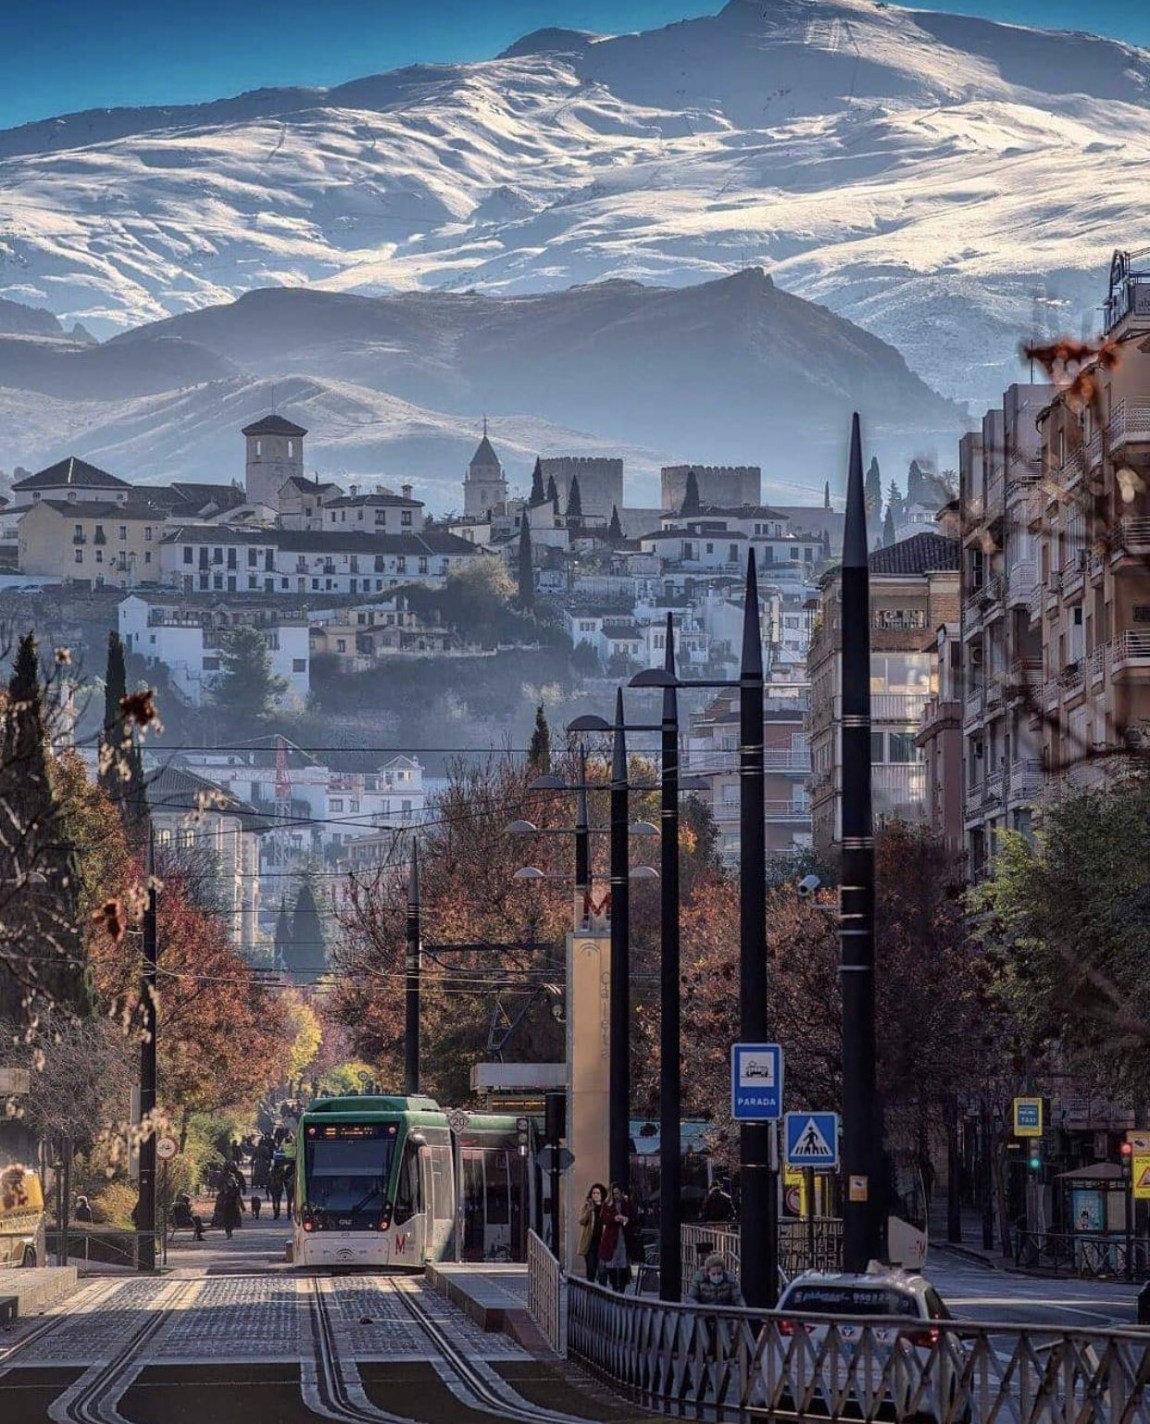 Really cool photo. In the foreground we see a street and a trolley on rails plus trees and foliage. In the middle ground we see urban buildings on a hillside. In the background we see massive, rugged and snowy mountains.